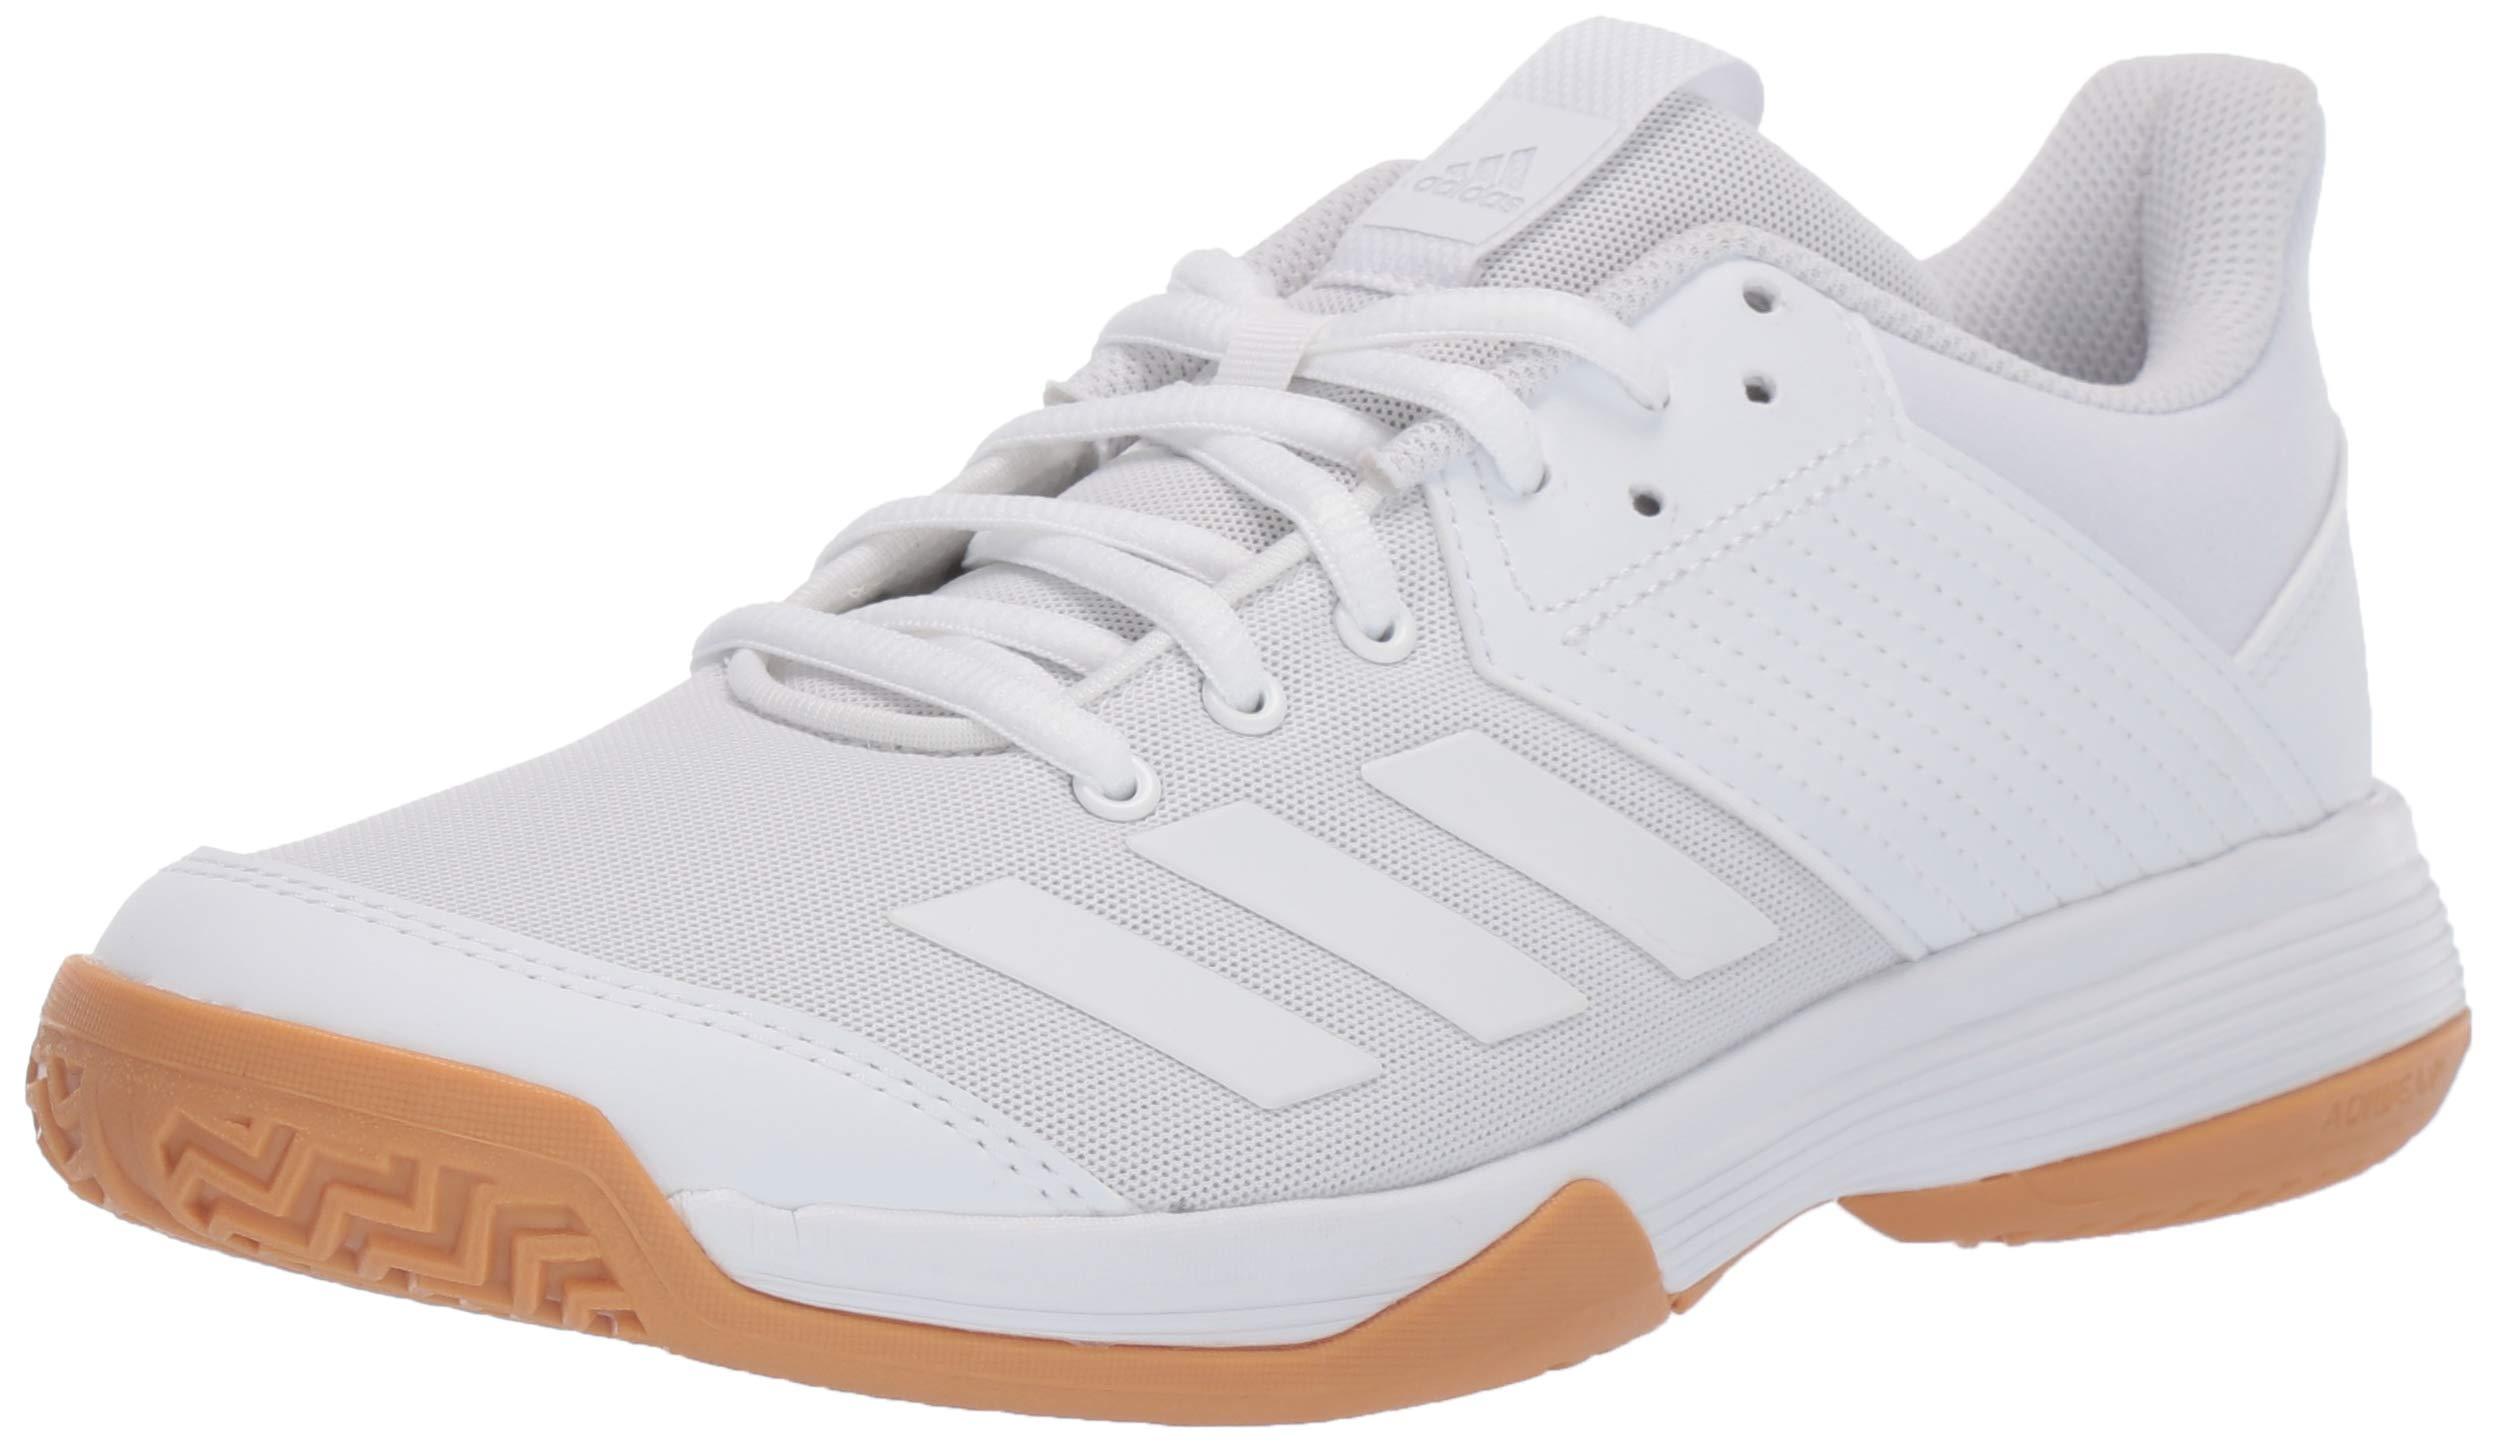 adidas Ligra 6 Volleyball Shoes in White - Lyst